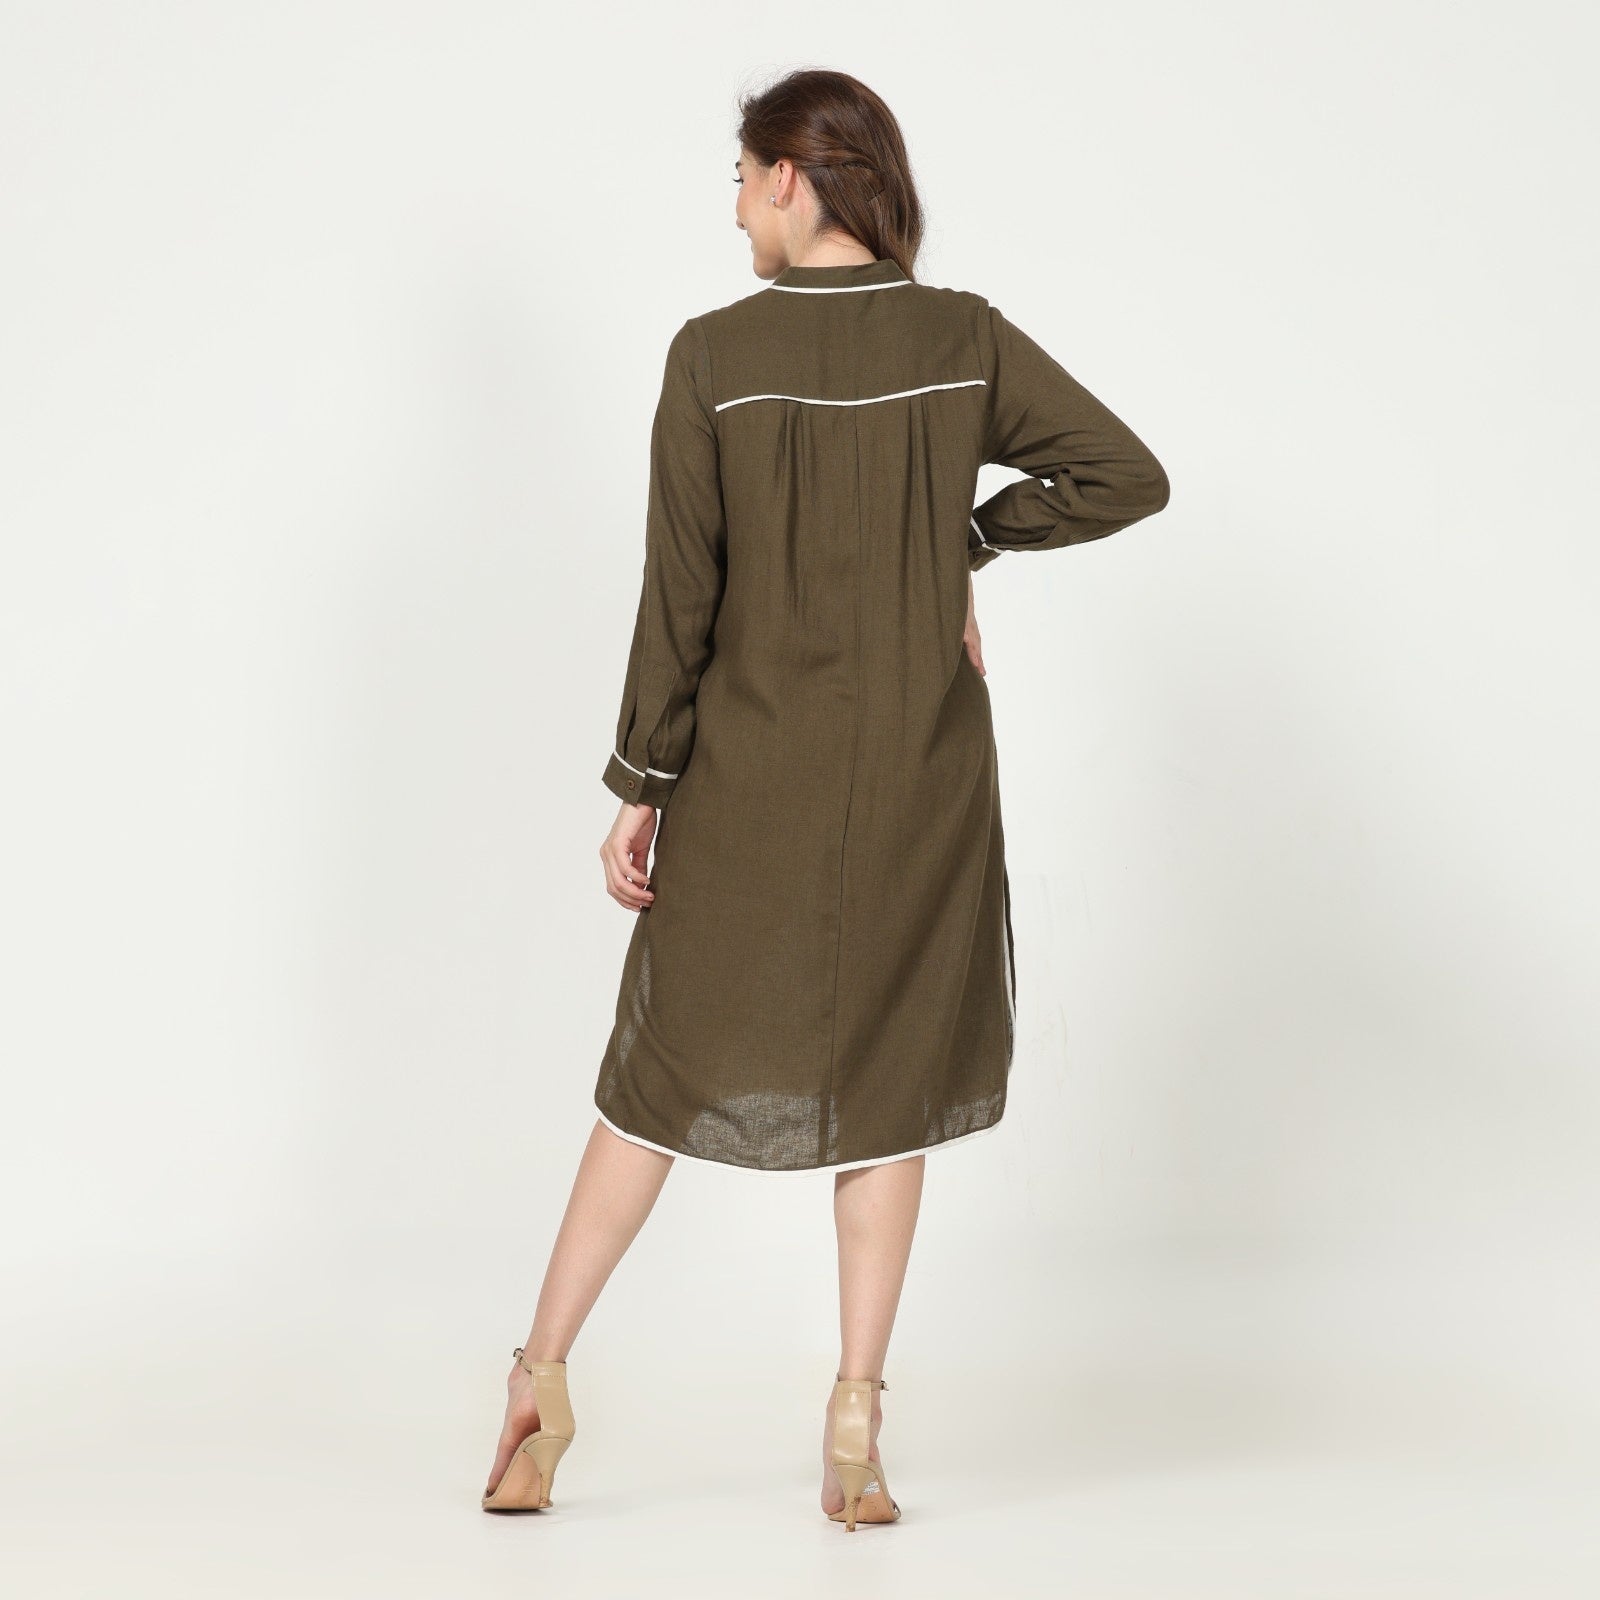 Long Shirt - Olive Green With Contrast Edging - Limited Edition